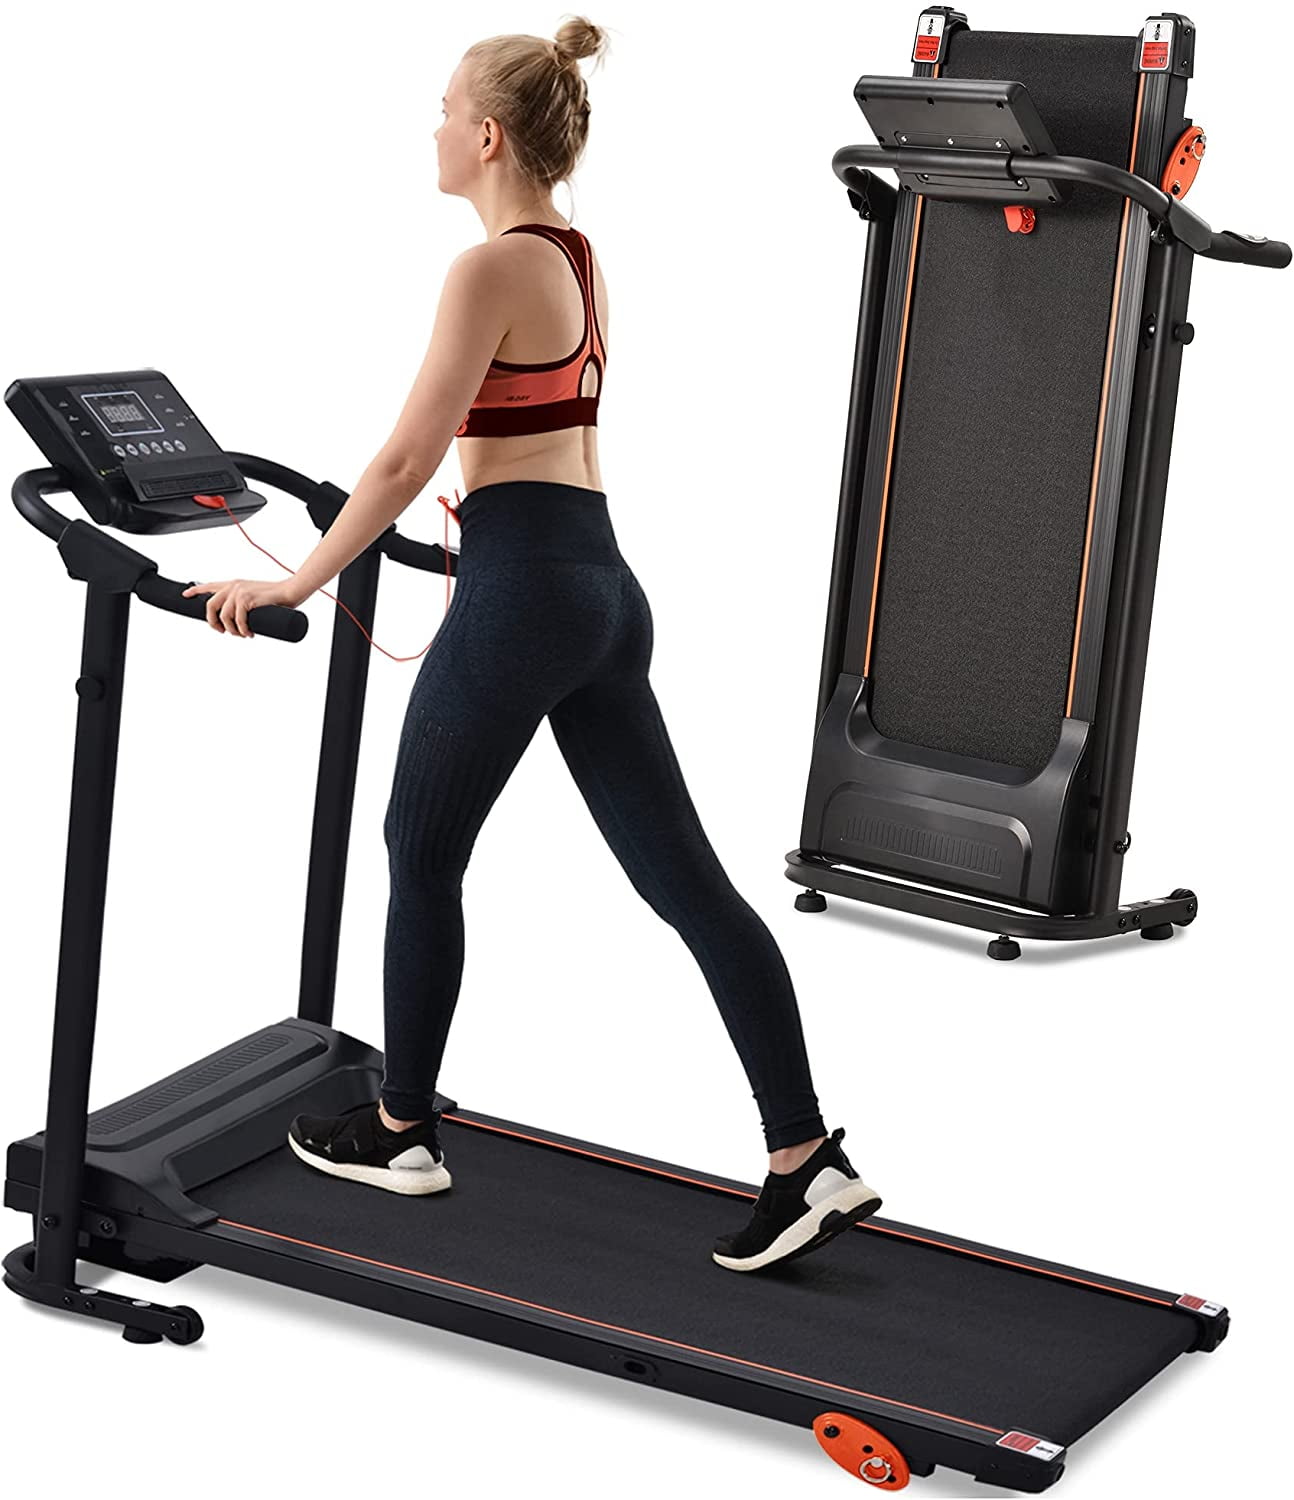 Jogging & Walking Machine with 12 Perset Programs Device Holder Heartbeat Sensor and 3-Level Incline Merax Foldable Treadmill for Home 2.5HP Portable Running 